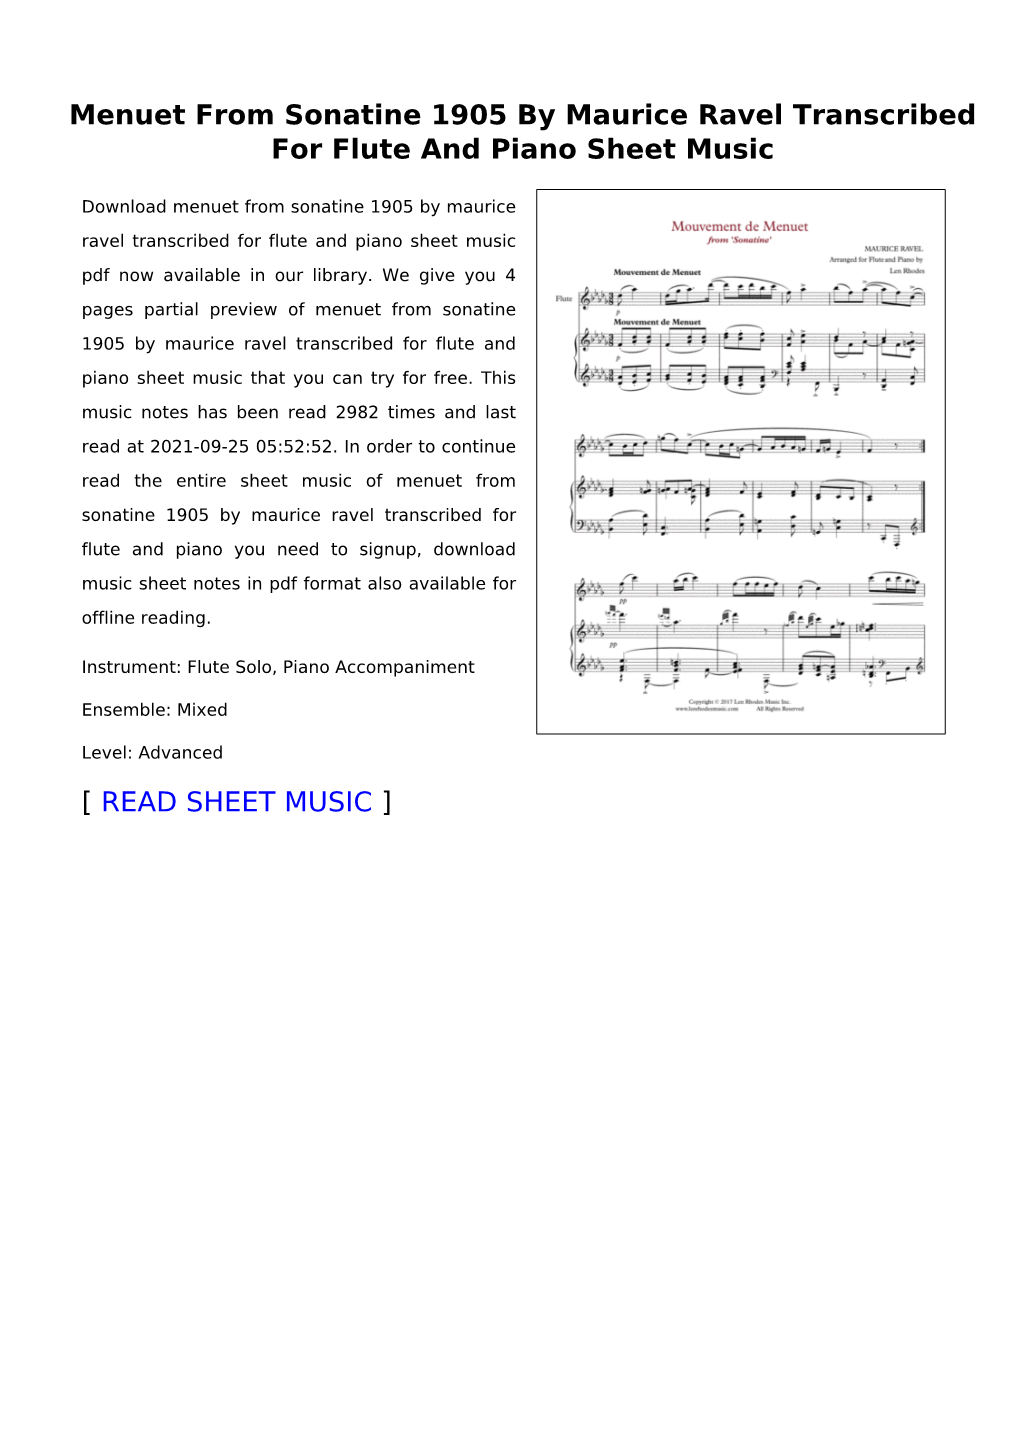 Menuet from Sonatine 1905 by Maurice Ravel Transcribed for Flute and Piano Sheet Music